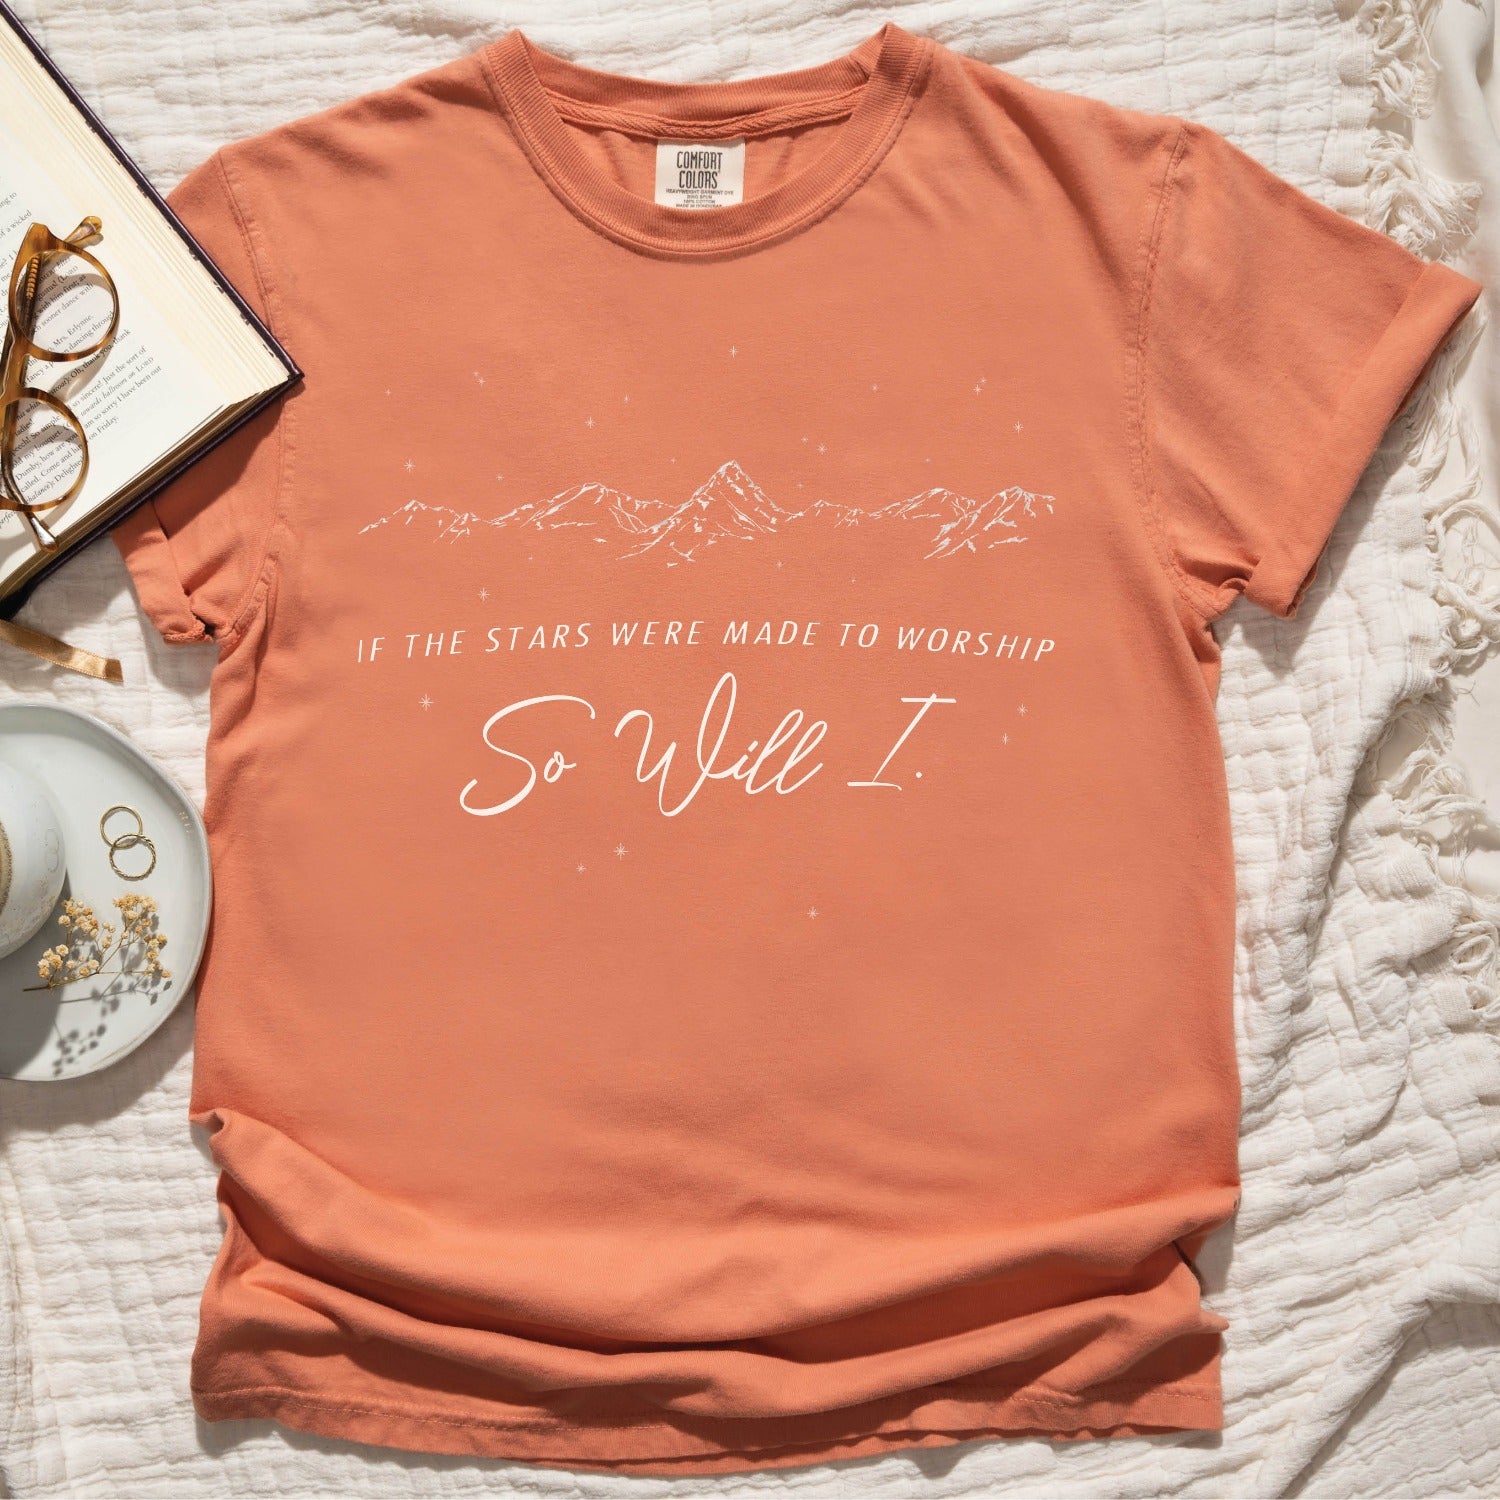 Terracotta color Christian unisex Comfort Colors 1717 t-shirt with a white hand-drawn mountain range and starry sky that says this faith-based bible verse quote, "If the Stars Were Made to Worship So Will I", created for men and women Kingdom of God believers